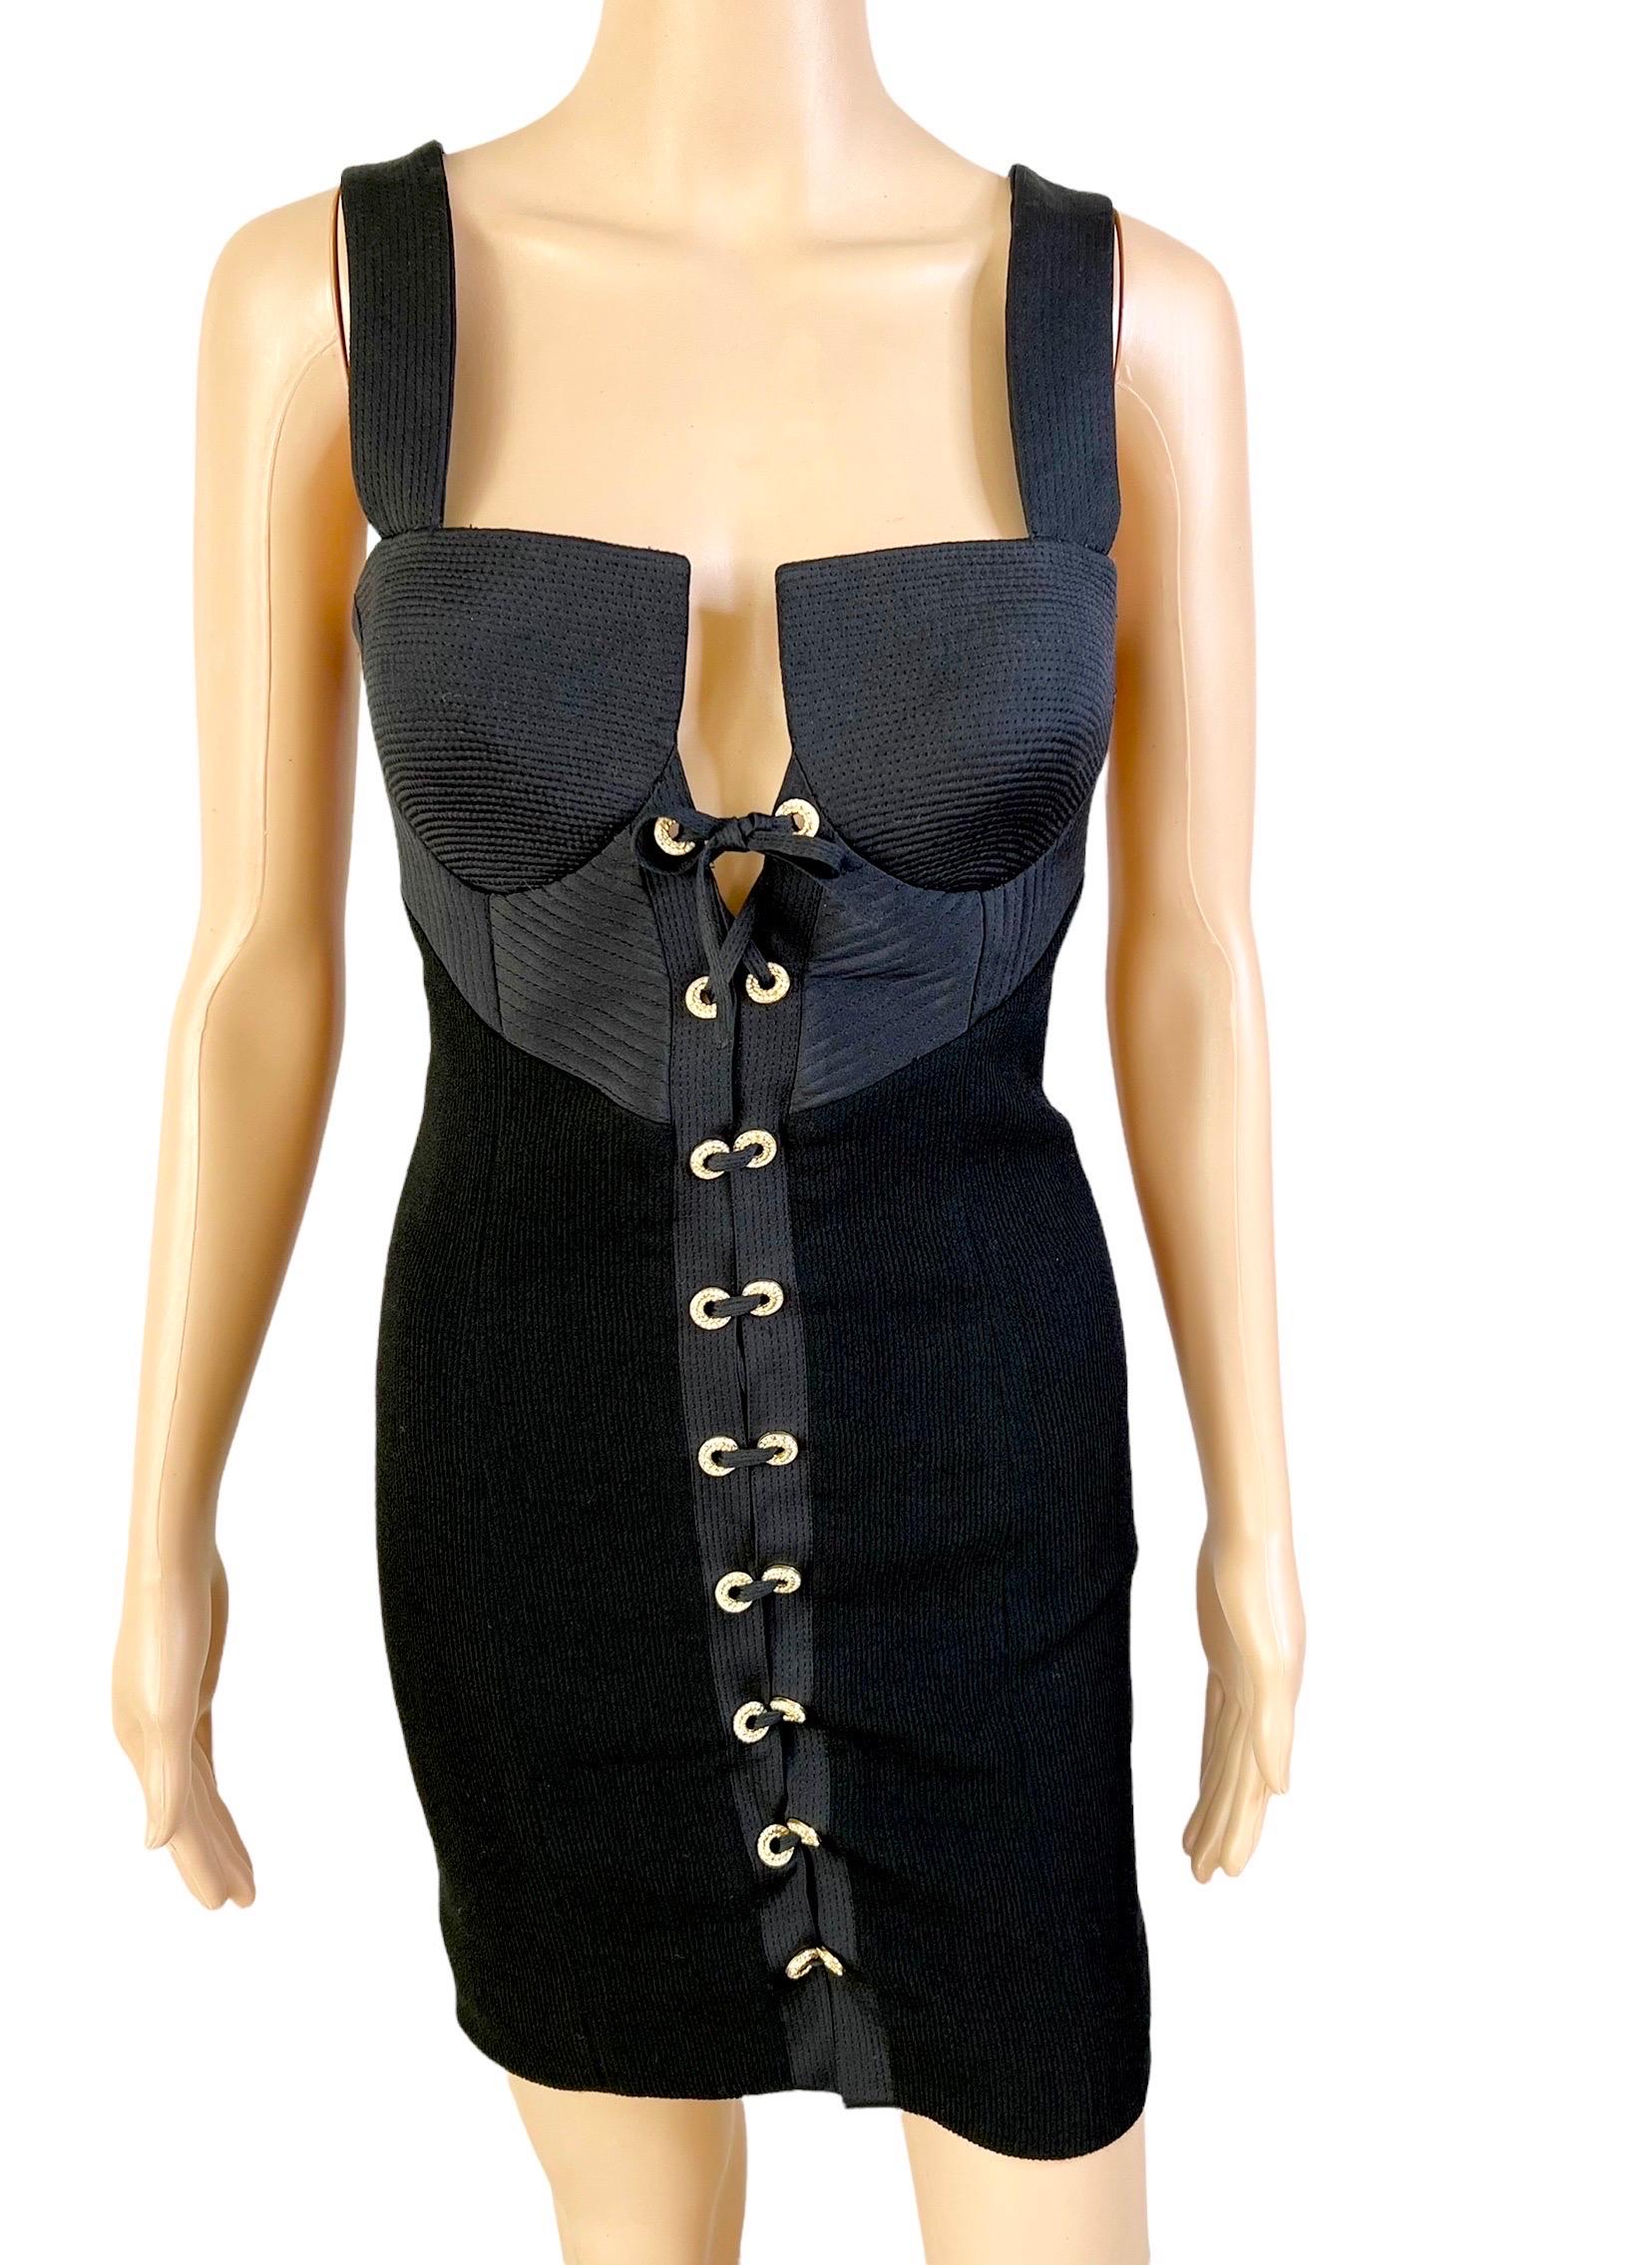 Gianni Versace S/S 1992 Couture Bustier Corset Lace Up Black Mini Dress IT 42

Condition: A couple missing embellishments on the grommets as is common with Gianni Versace pieces, not noticeable when worn.